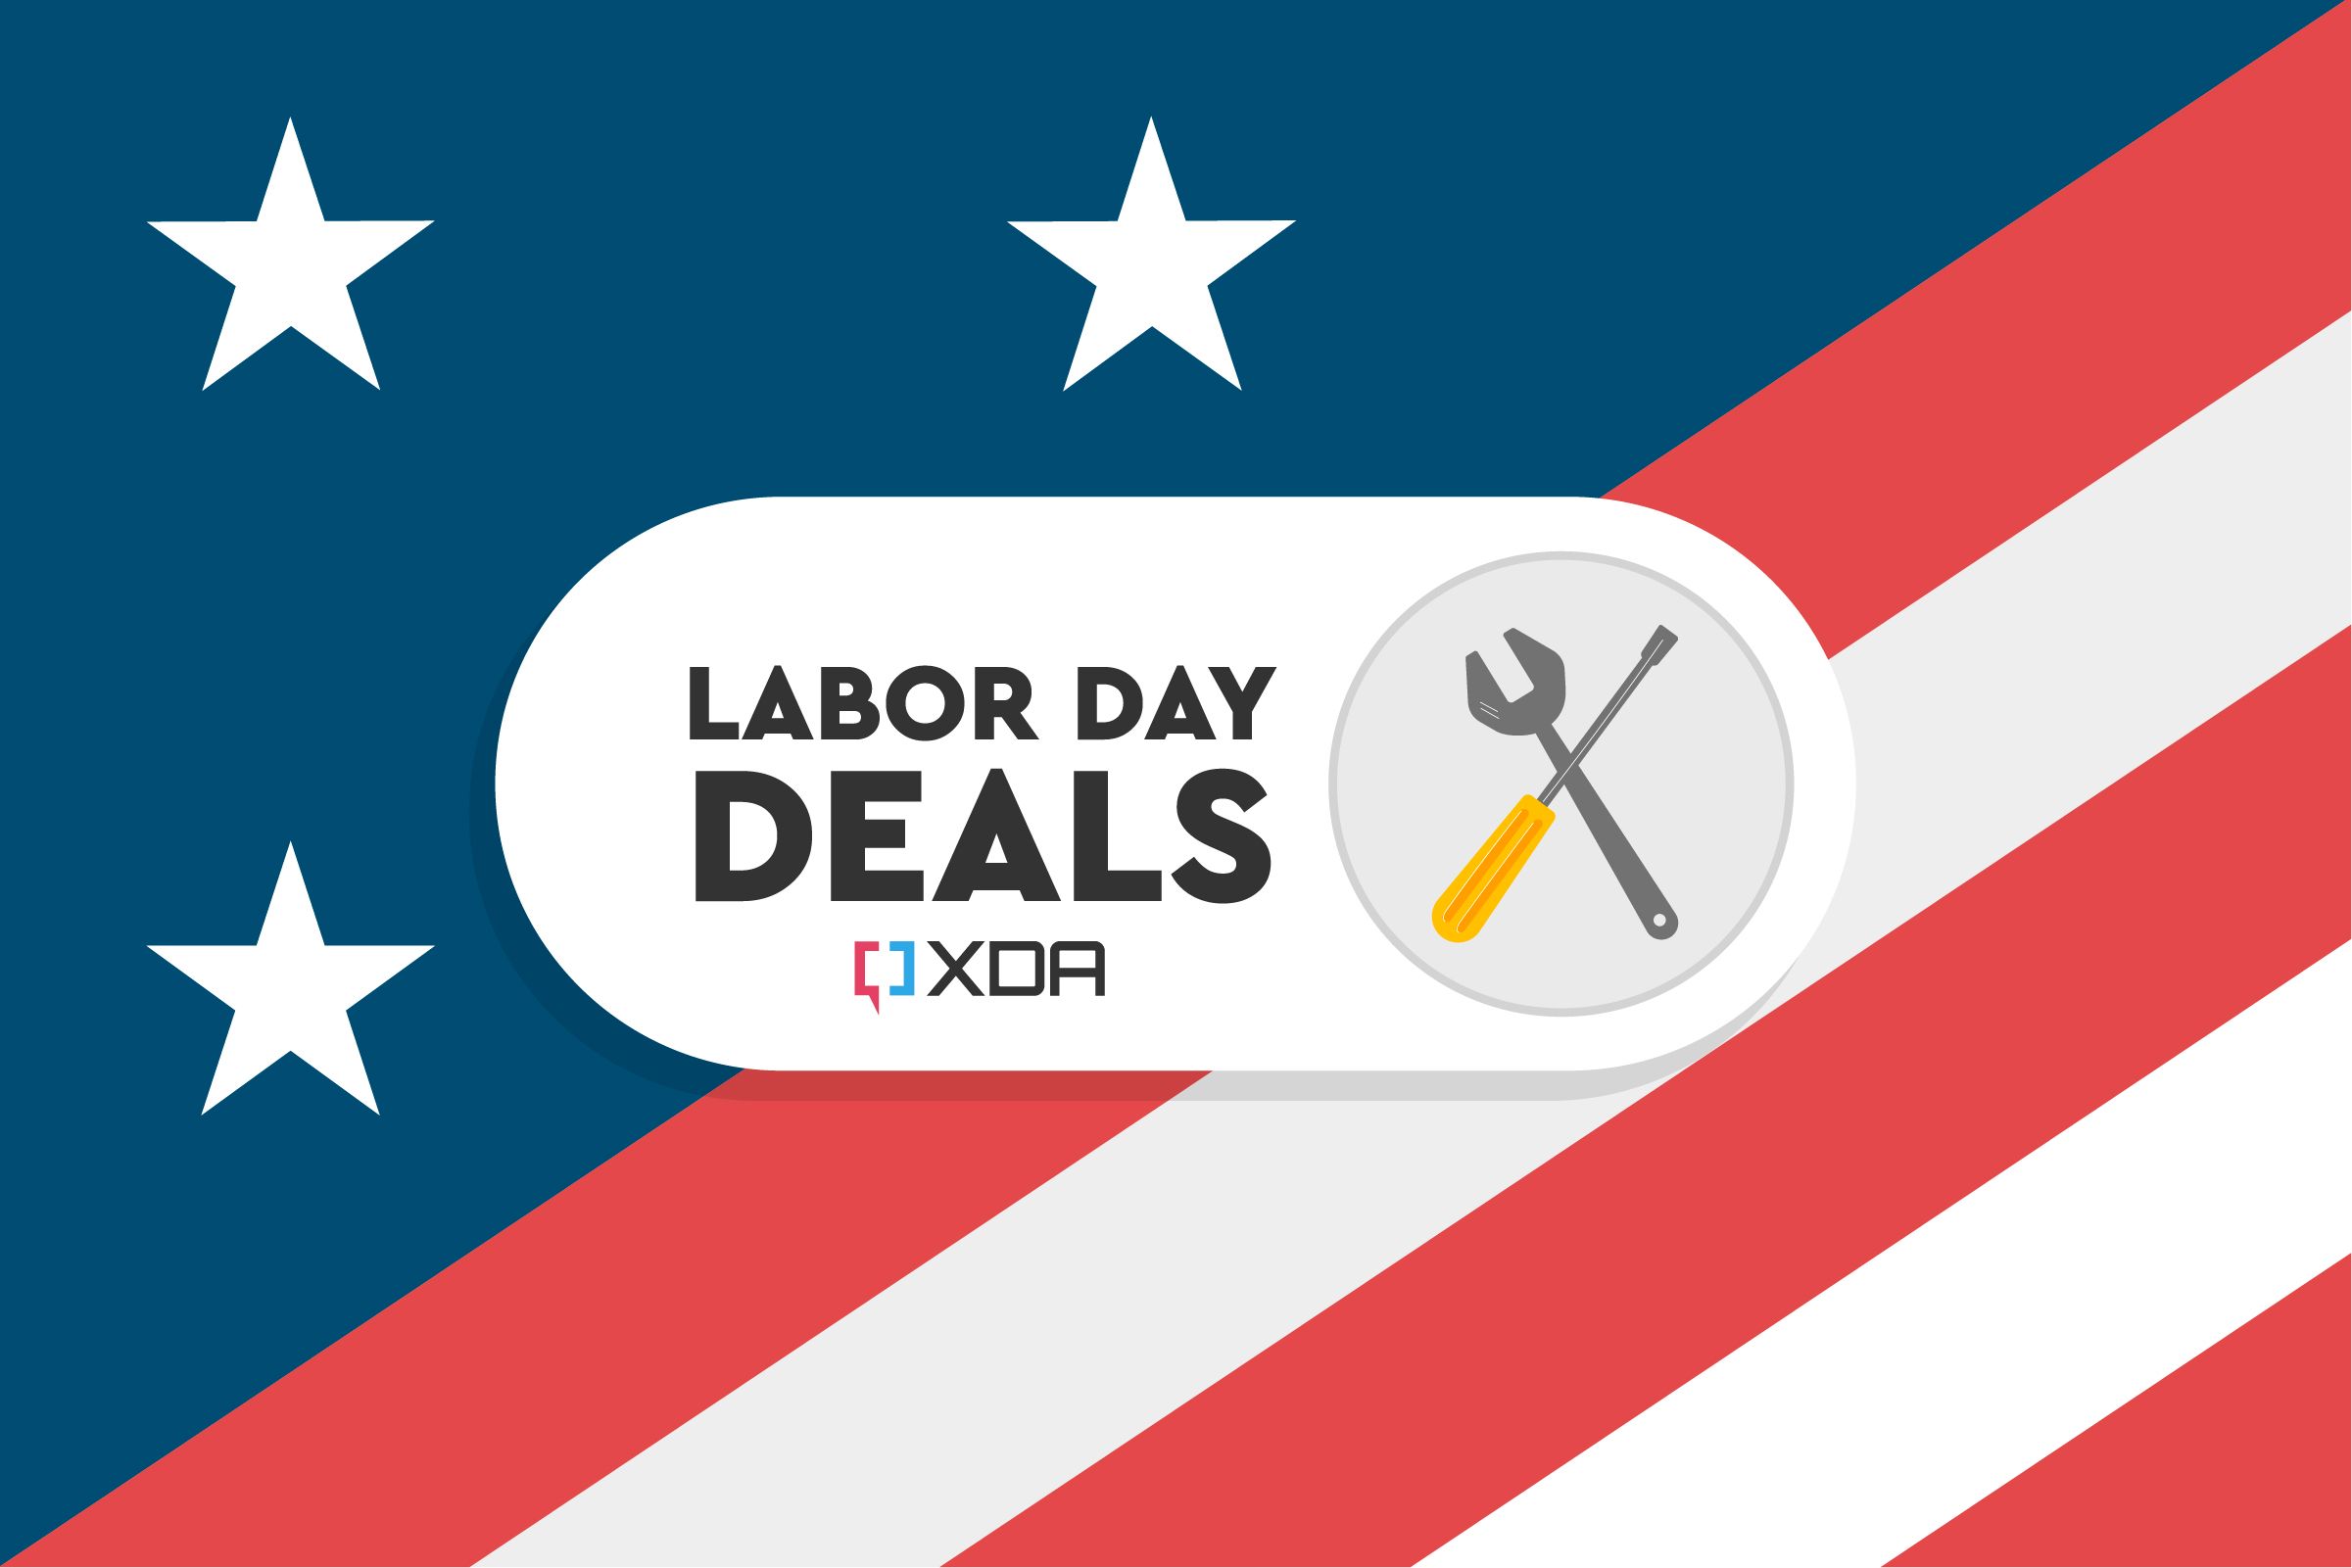 Labor Day deals Save big on TVs, laptops, accessories, and more